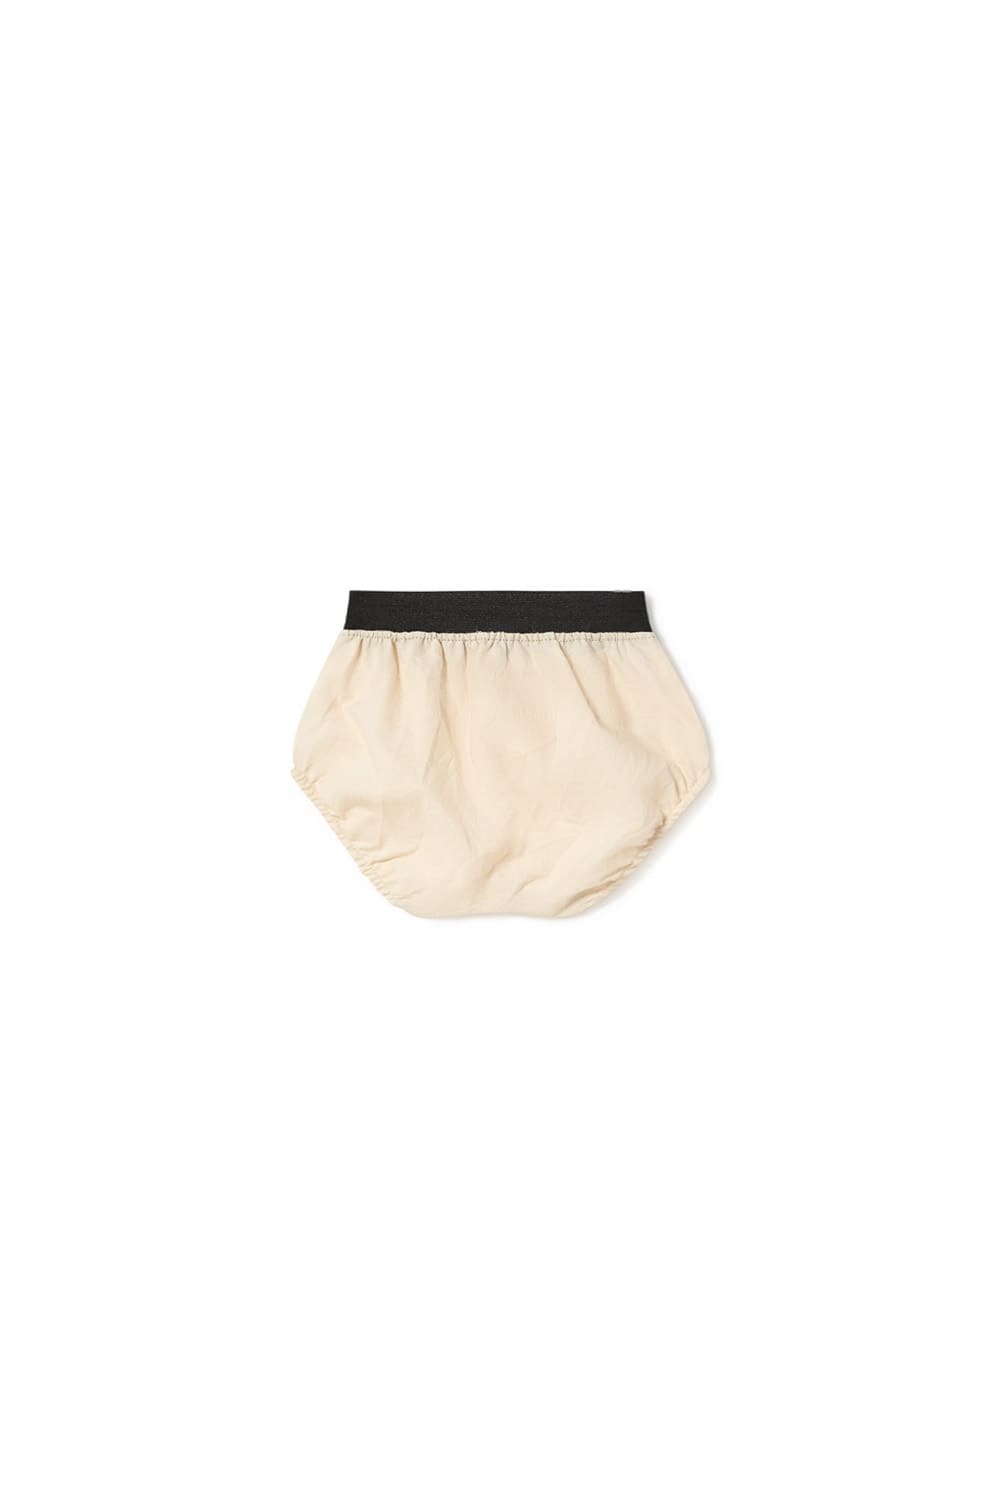 Little Creative Factory Crinkled Bloomers - Off White